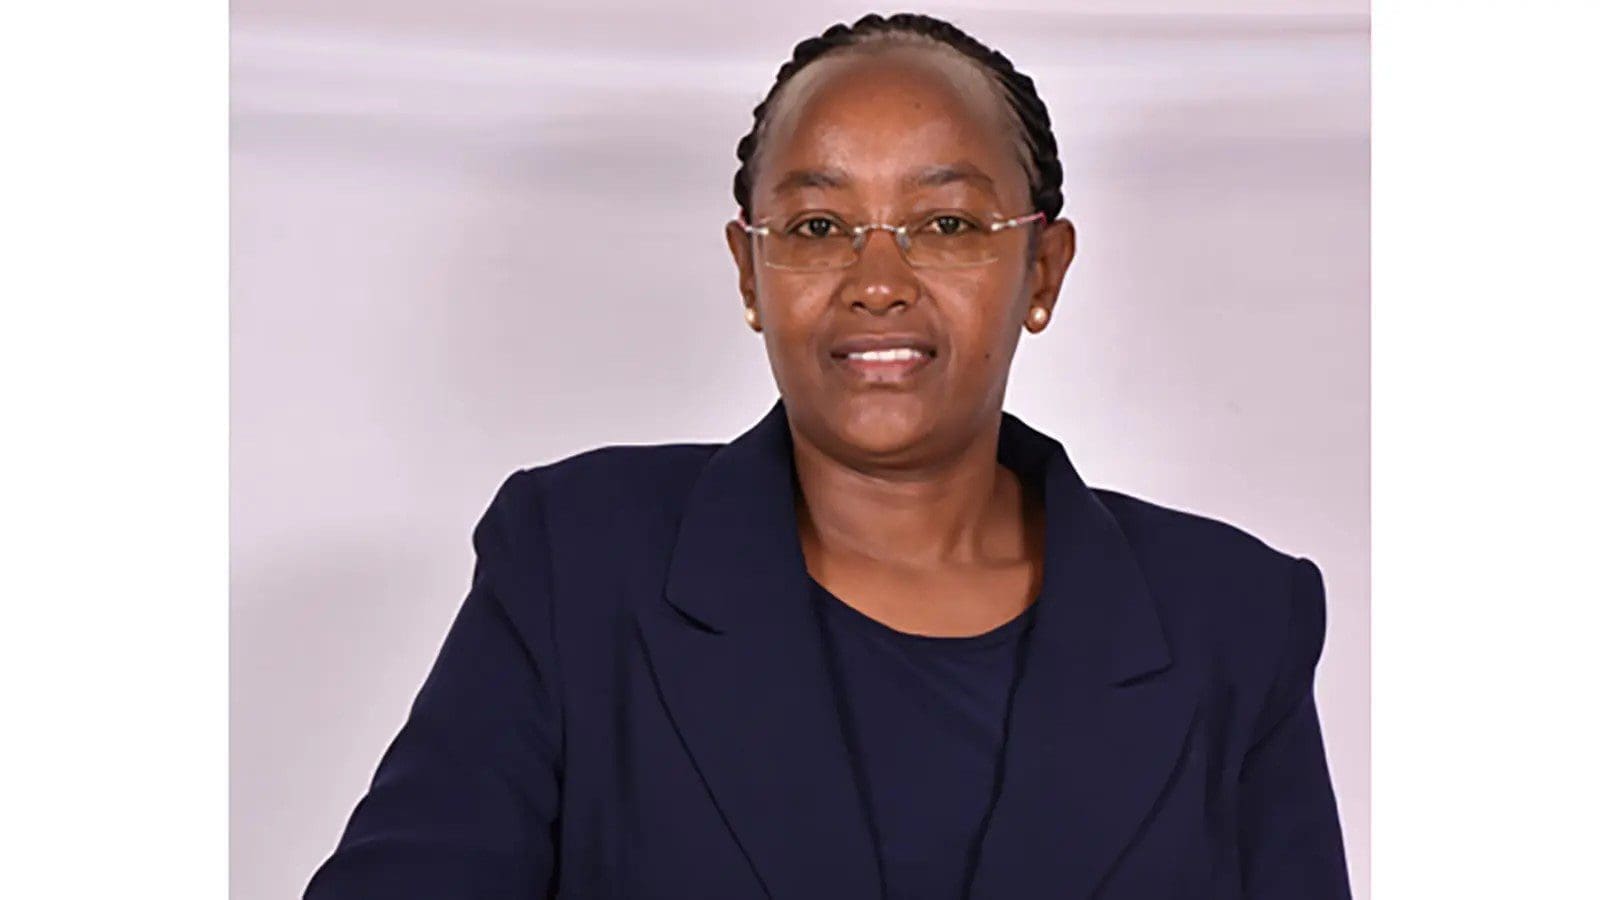 KEBS Standards Director Esther Ngari appointed as acting Managing Director